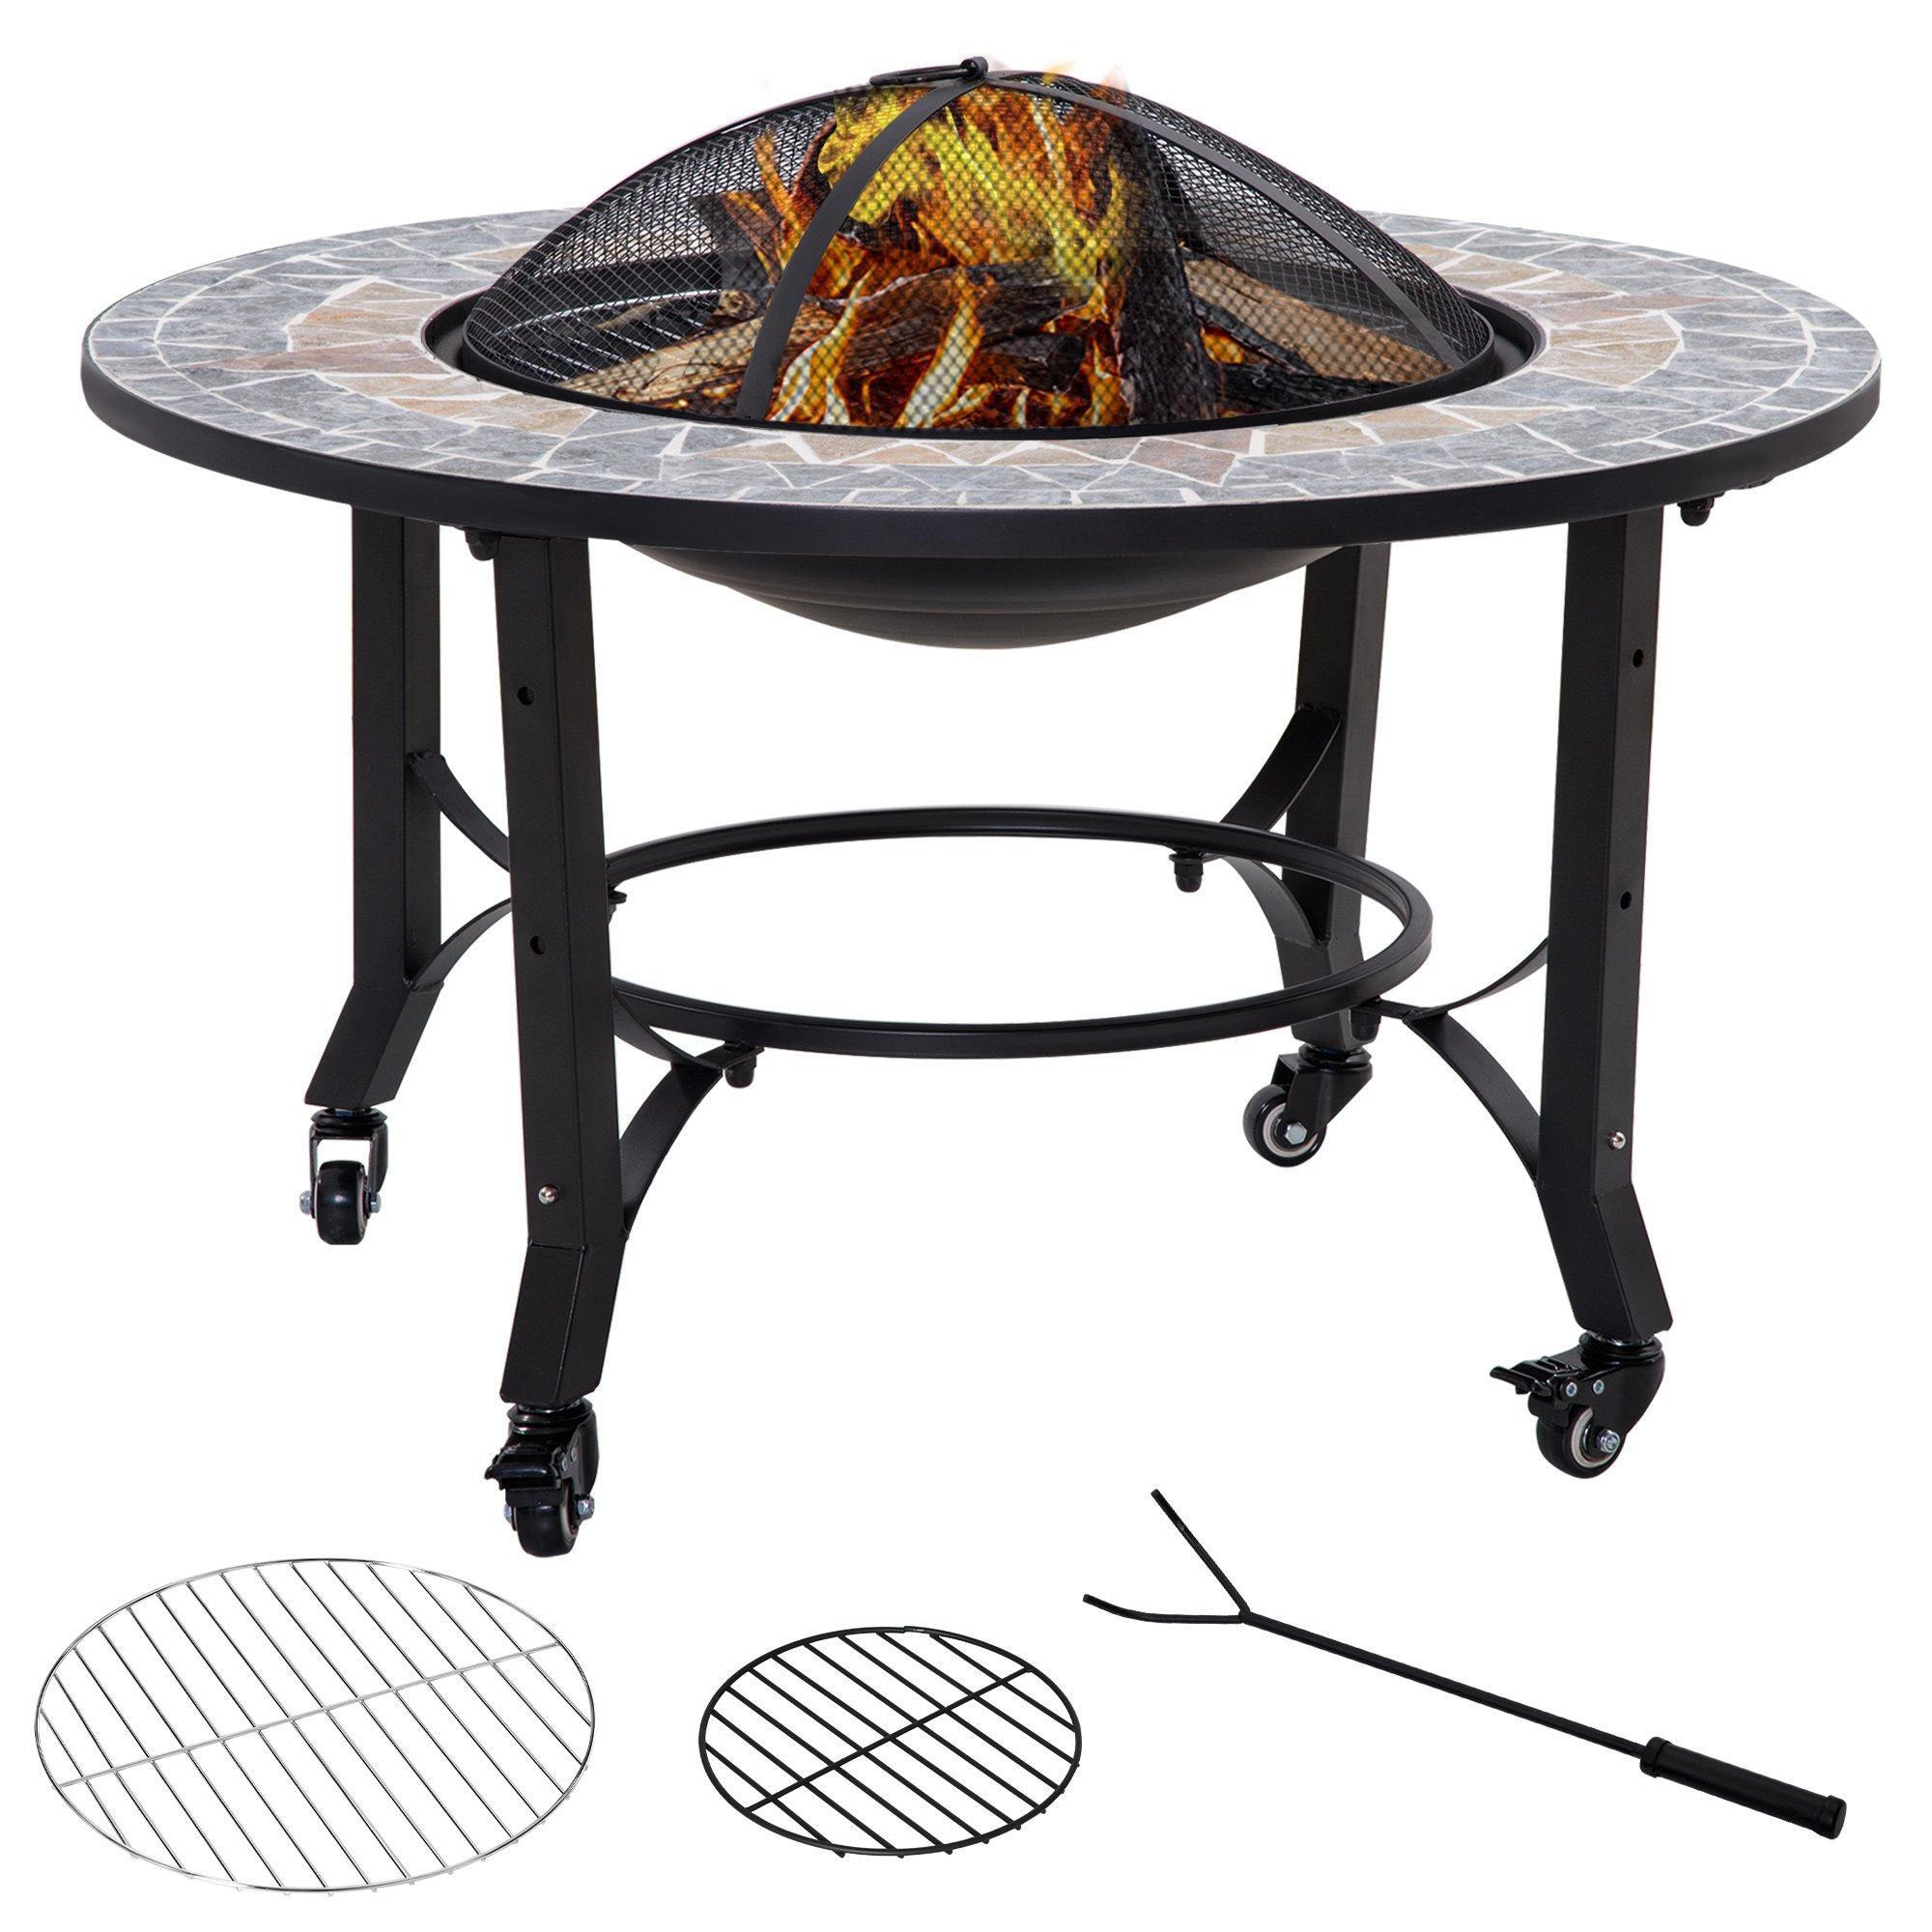 Firepit on Wheels Fire Bowl W/ Grill Spark Screen Cover Fire Poker - image 1